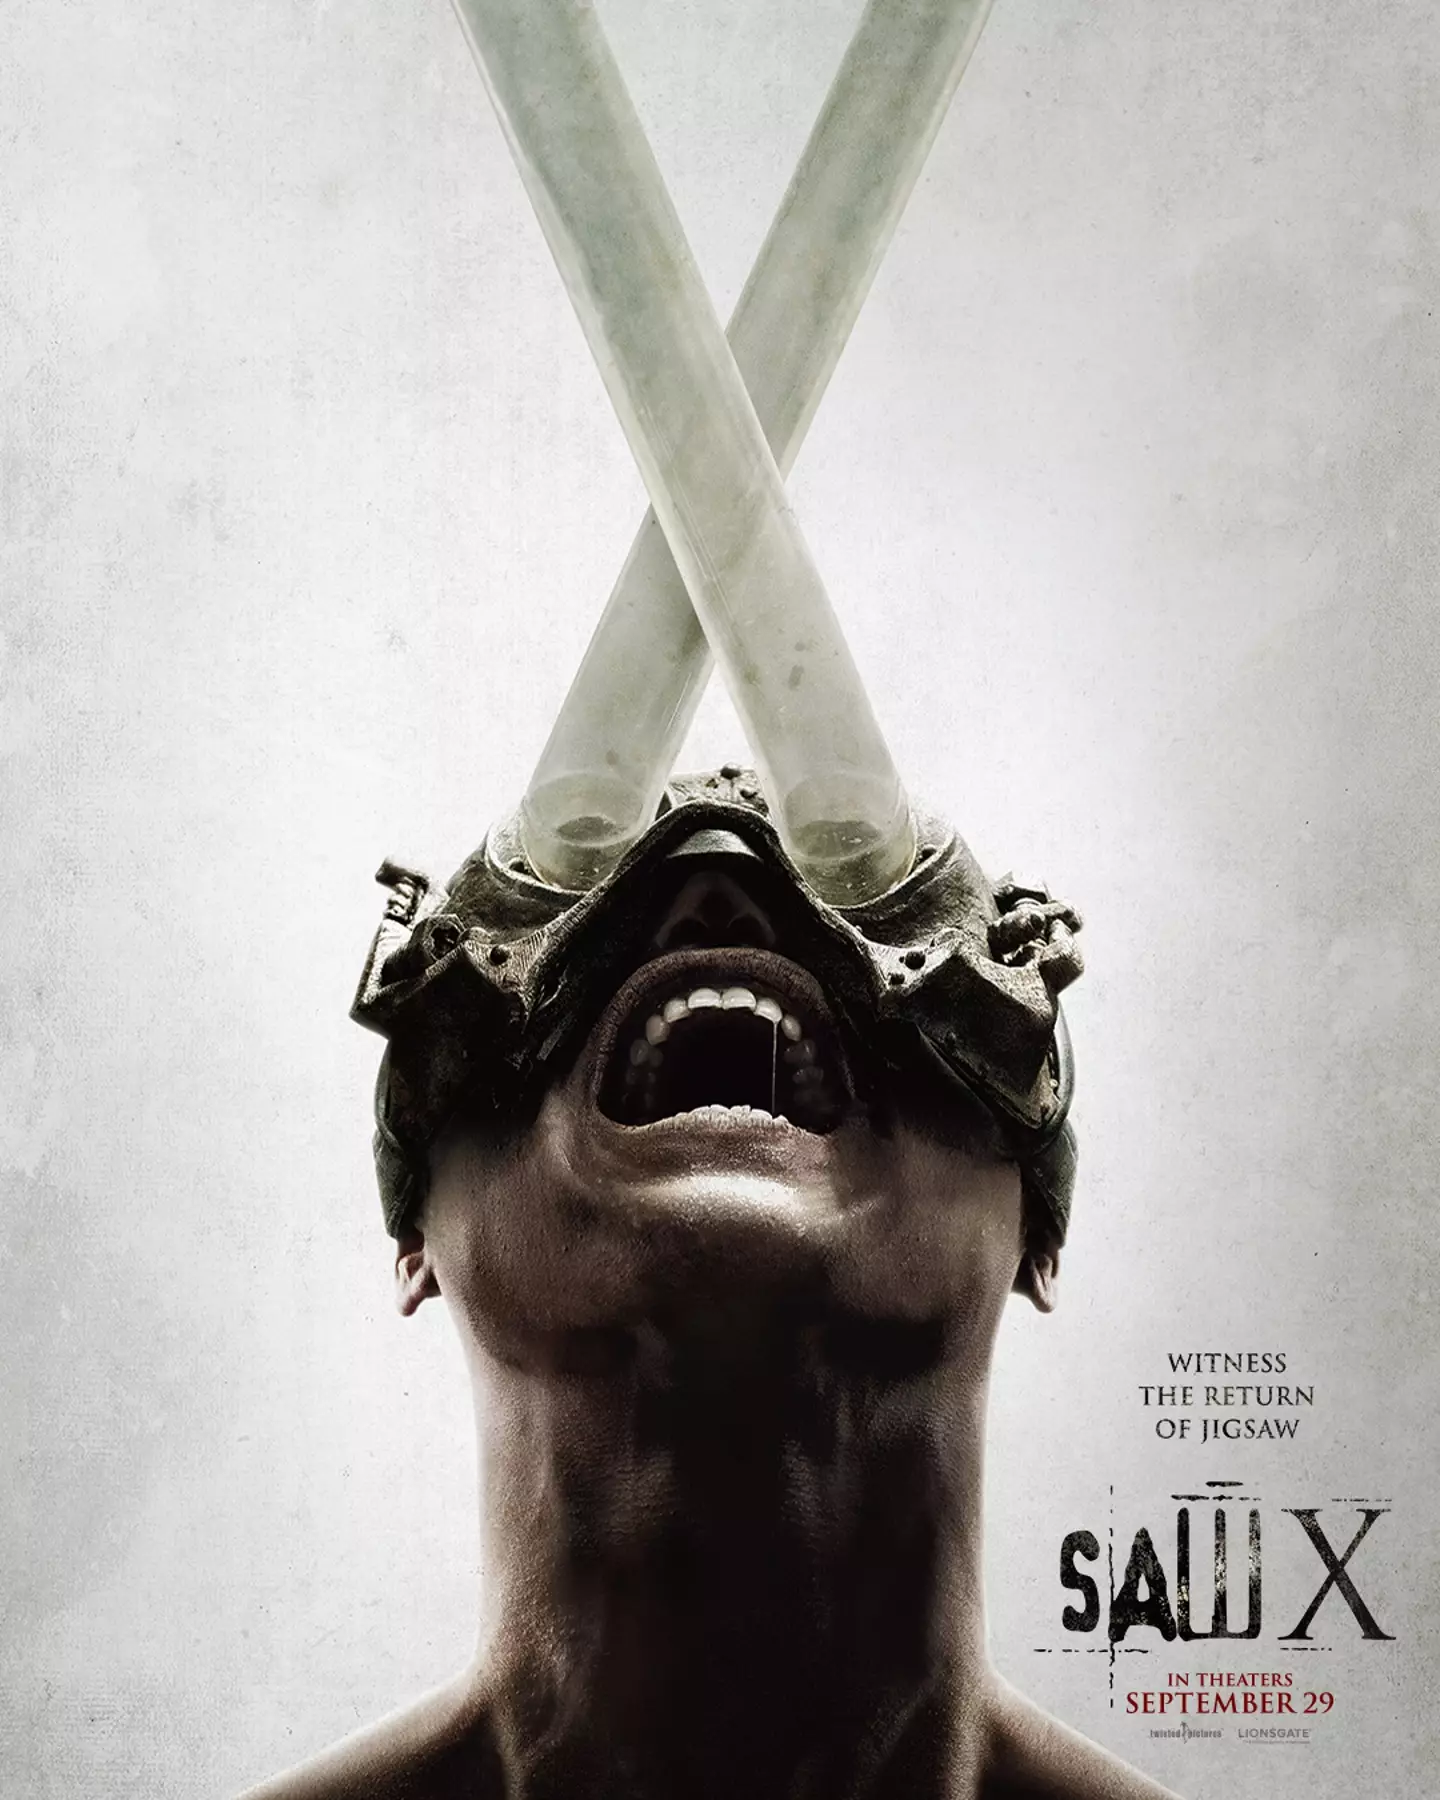 The Saw X poster teases an upcoming game.